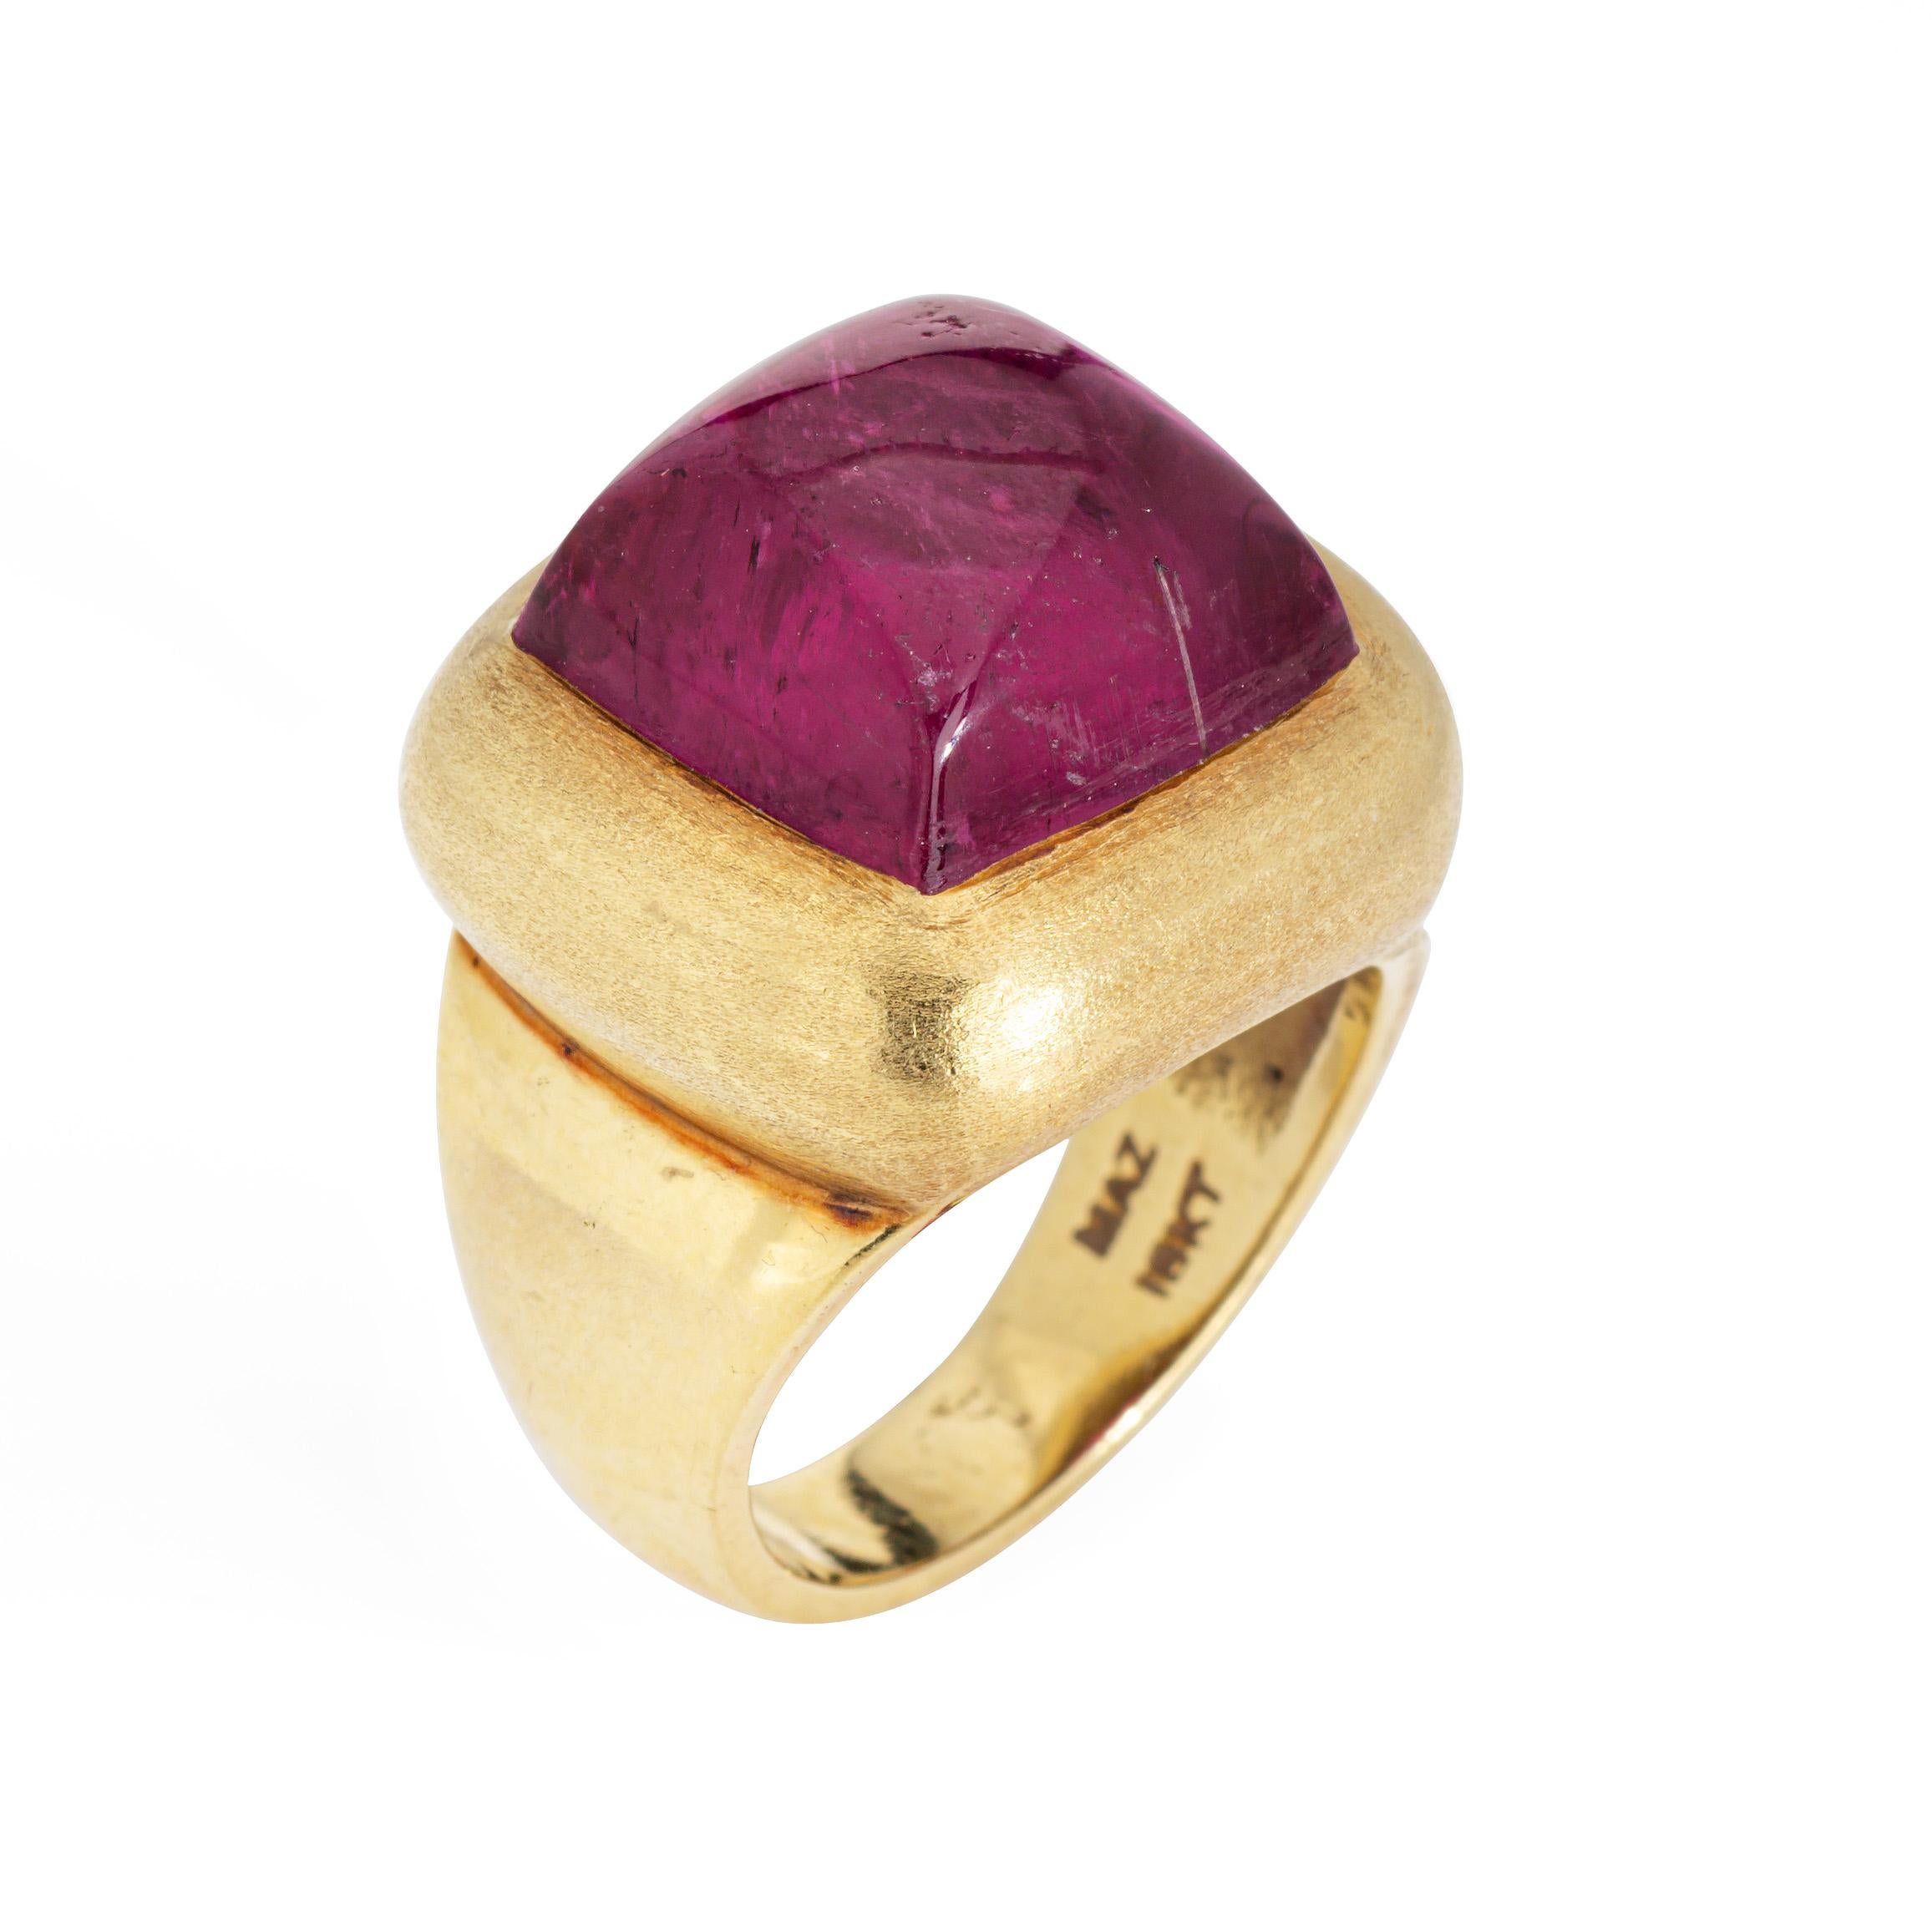 Stylish Maz pink tourmaline ring crafted in 18k yellow gold. 

Cabochon cut pink tourmaline measures 13mm diameter. The tourmaline is in very good condition and free of cracks or chips.    

The bright Fushia pink tourmaline is the star of the ring,